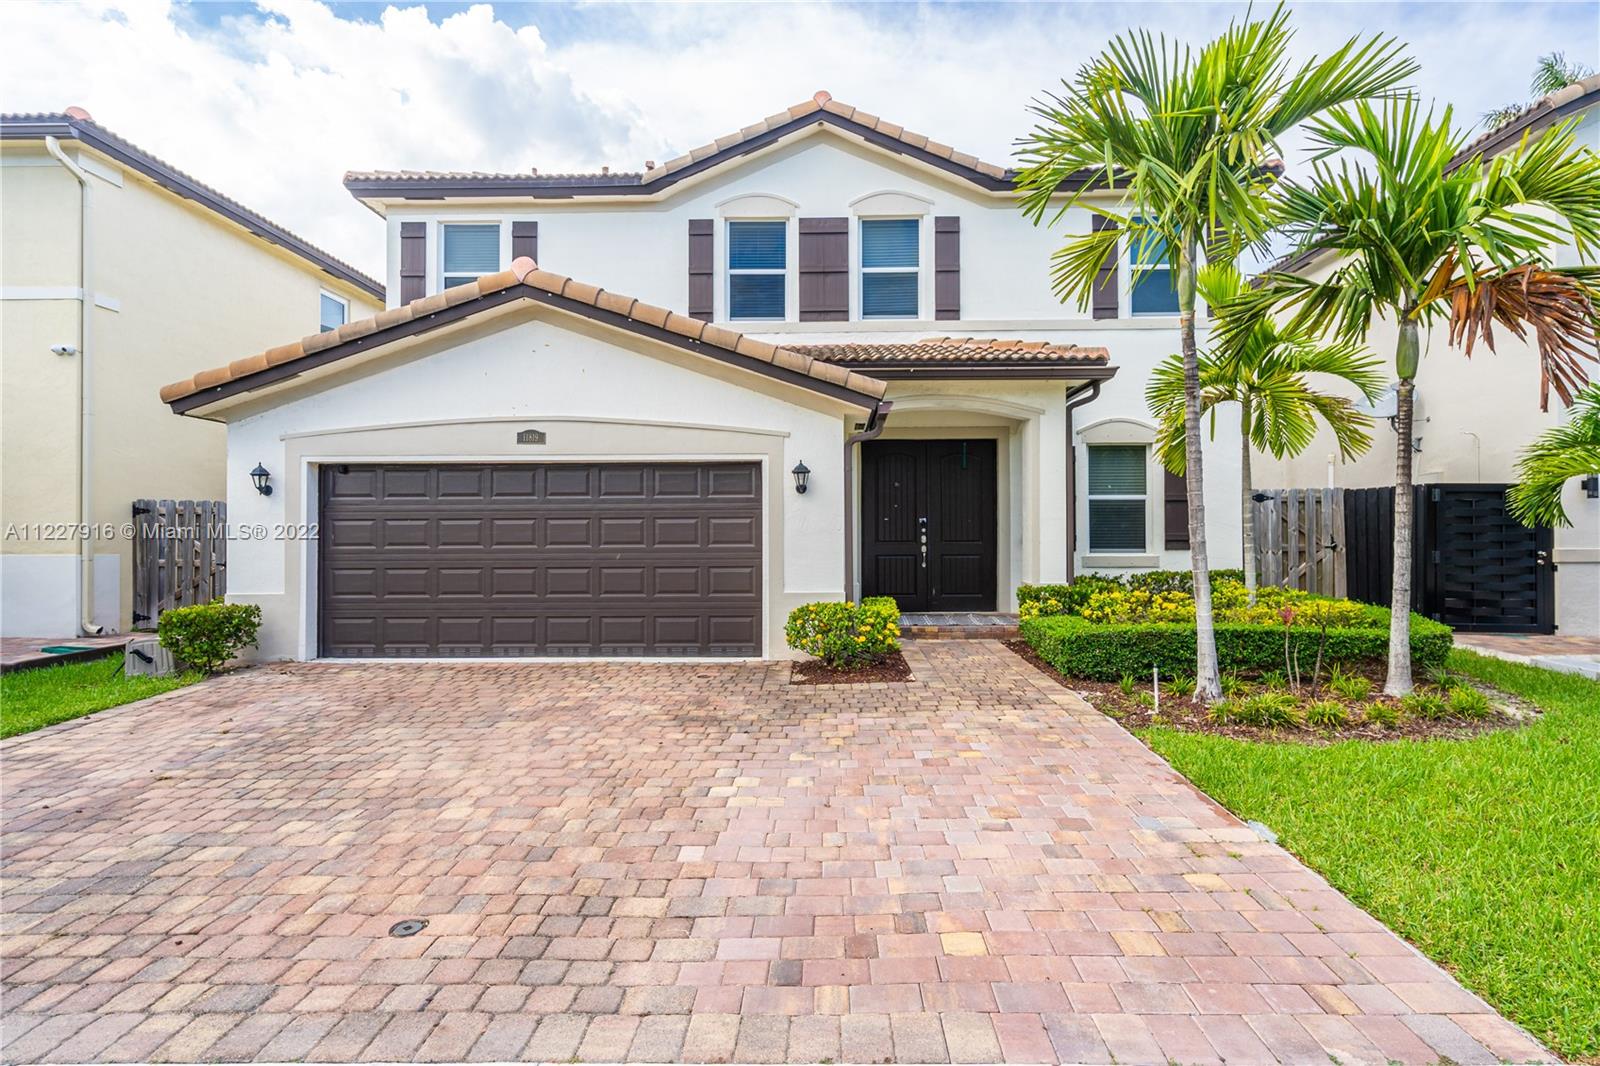 Lovely home located in Hemingway Point, just minutes from Turnpike and Black Point Marina! Built in 2017, this spacious 2-story home offers 4 bedrooms and 2.5 baths, a large kitchen with SS appliances overlooking living area and a comfortable floor plan for entertaining with half bathroom on ground floor. All bedrooms located upstairs for privacy and laundry room upstairs for convenience. Large 2 car garage and ample driveway parking space. Larger lot in Hemingway with fenced in yard and room for a pool! AGENTS, PLEASE SEE BROKER REMARKS